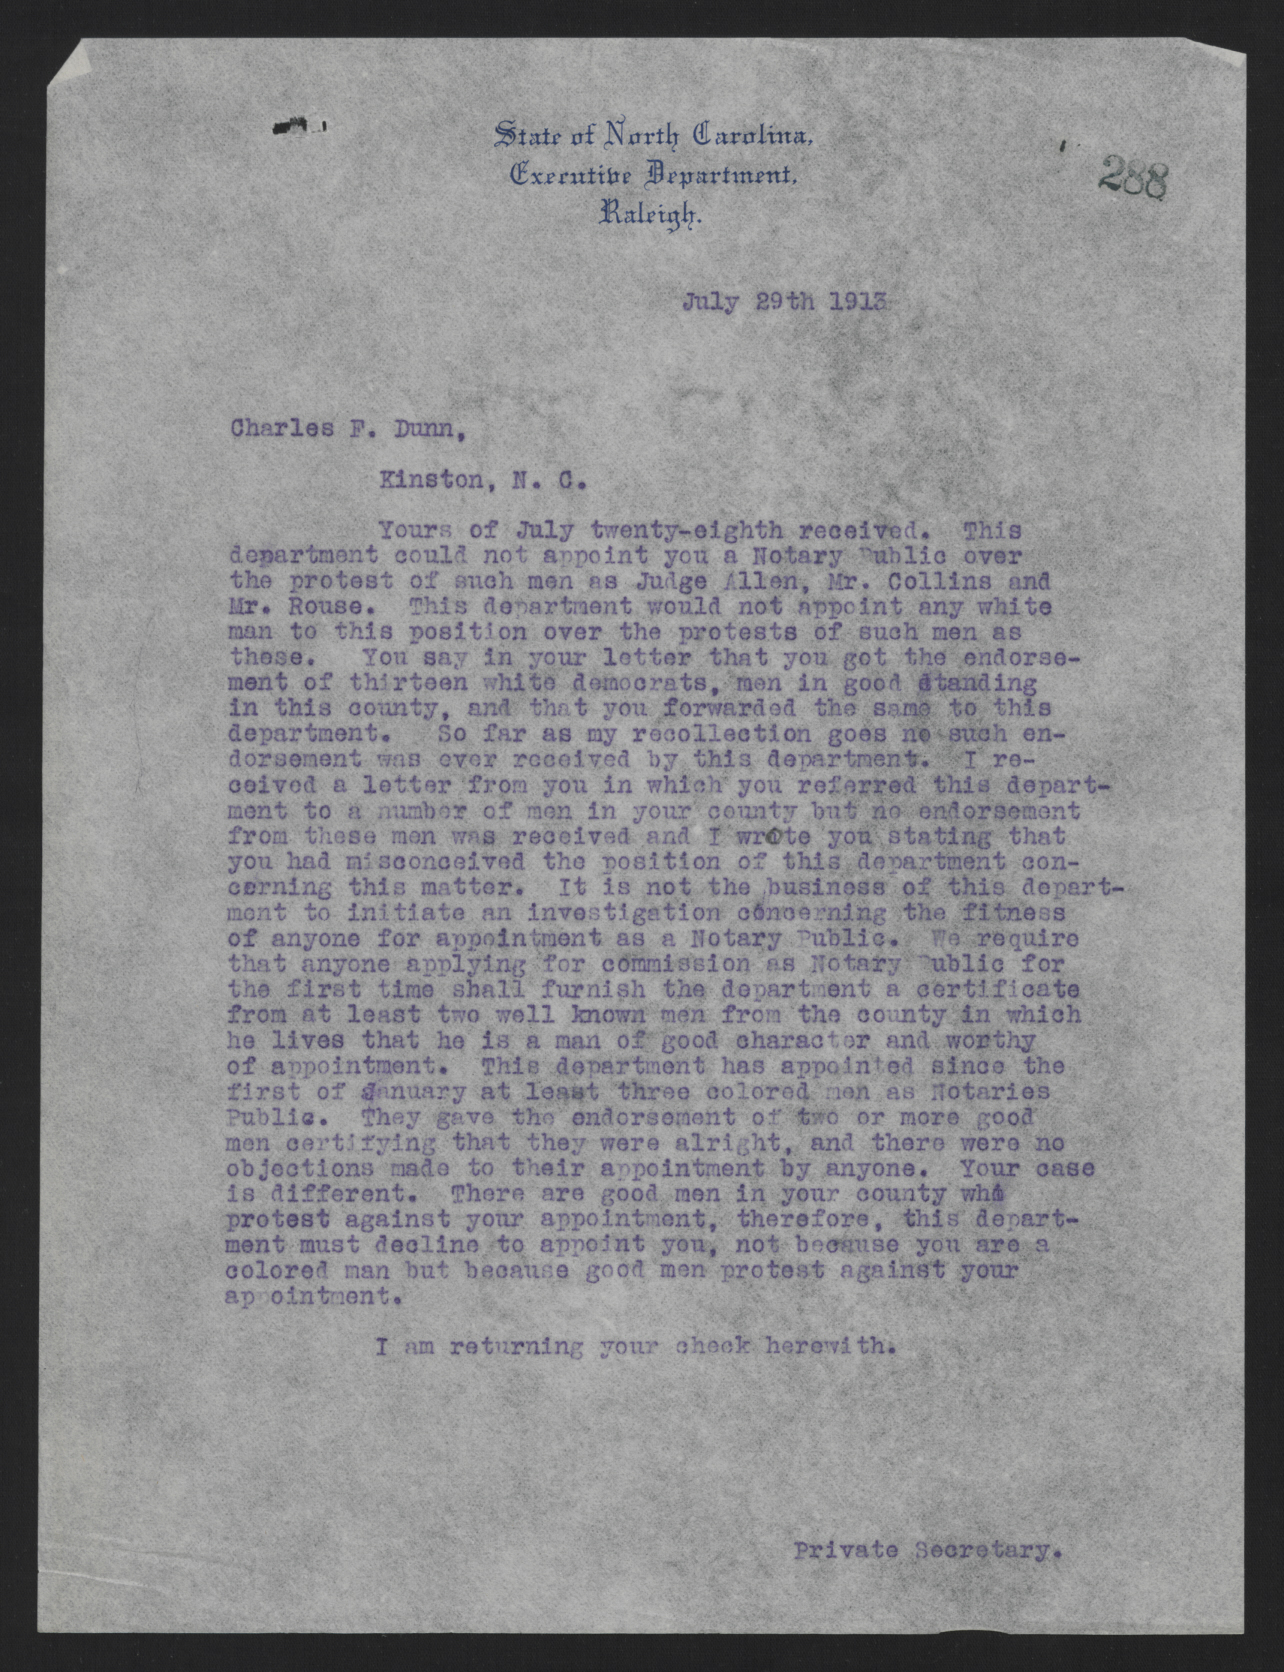 Letter from Kerr to Dunn, July 29, 1913